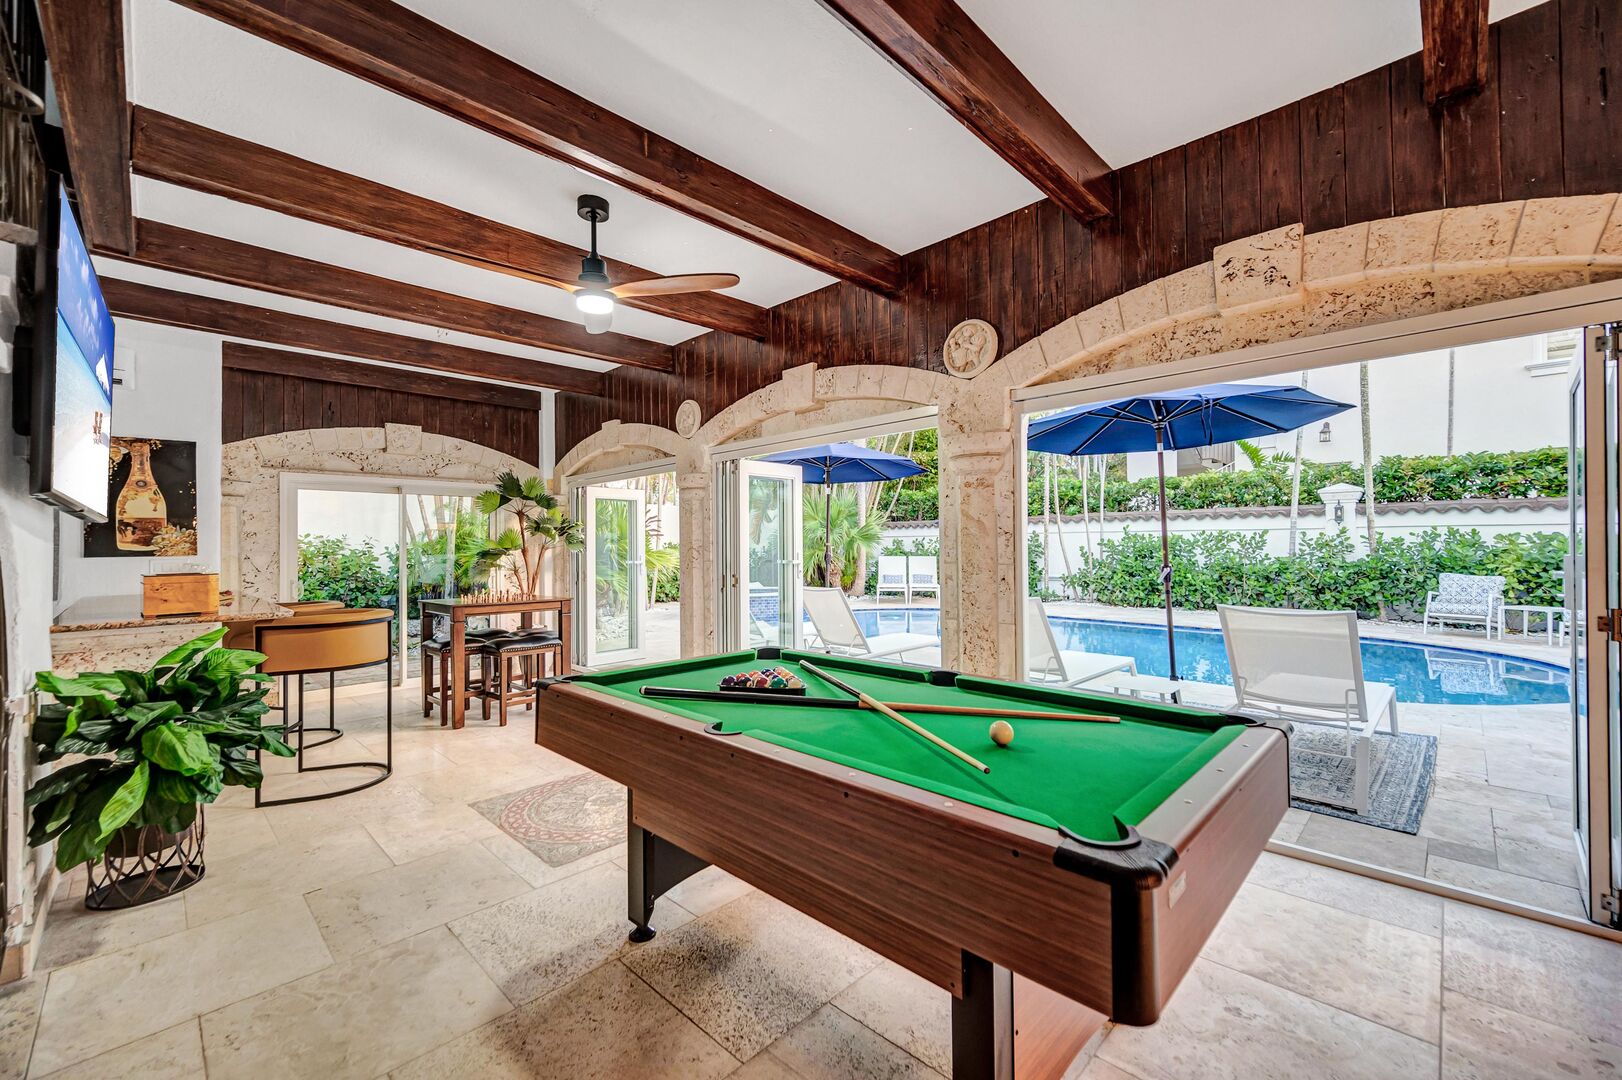 The covered patio, featuring a bar area with a pool table, boasts floor-to-ceiling windows providing seamless access to the heated pool.